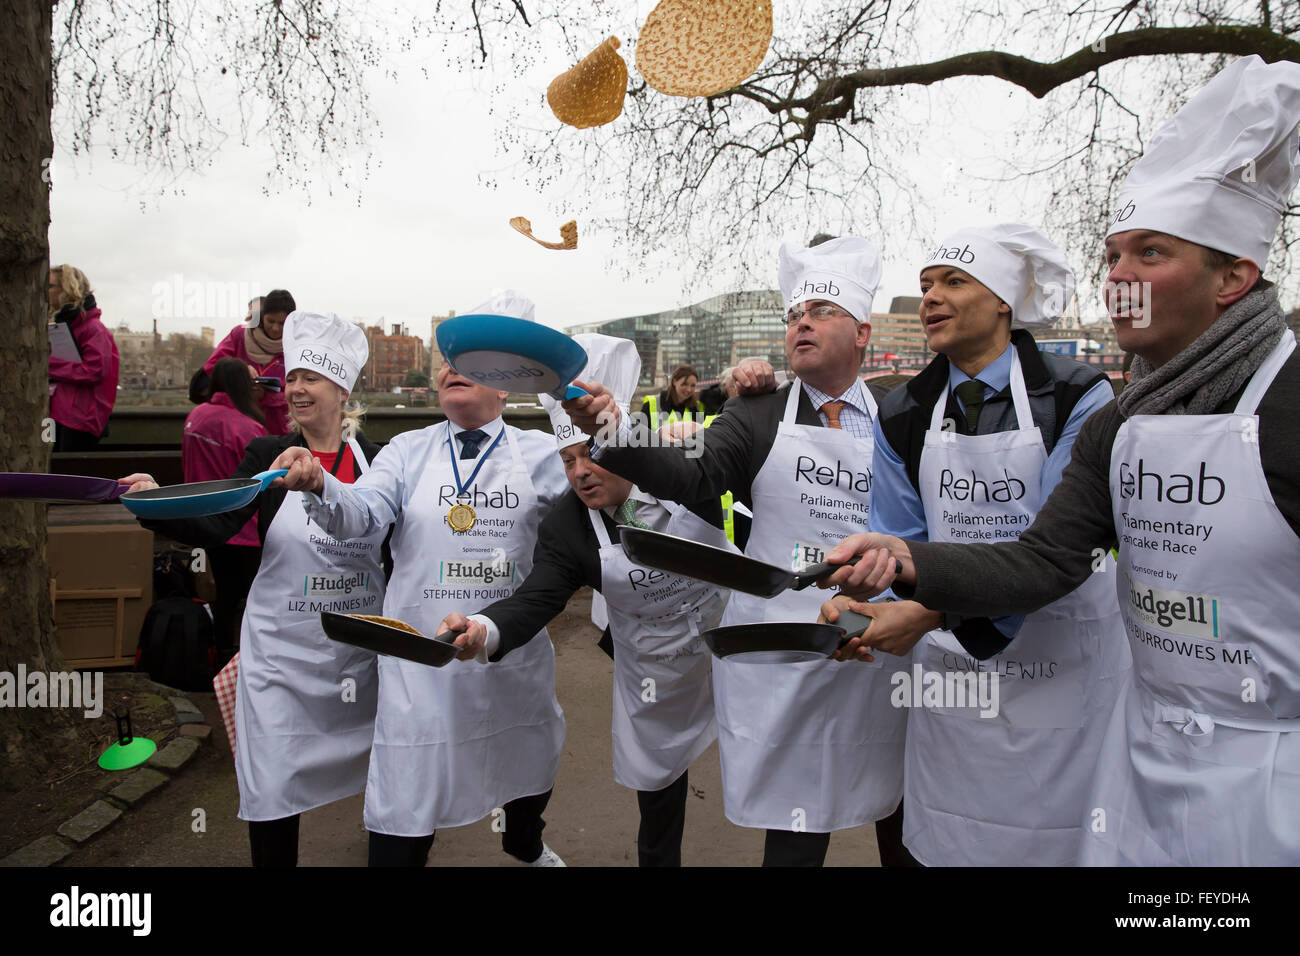 Westminster, London, UK. 9th February 2016. MP'S team celebrate after winning the Rehab Parliamentary Pancake Race 2016 as runners representing the House of Commons, the House of Lords and the Parliamentary Press Gallery raced against each other while tossing pancake Credit: Keith Larby/Alamy Live News Stock Photo